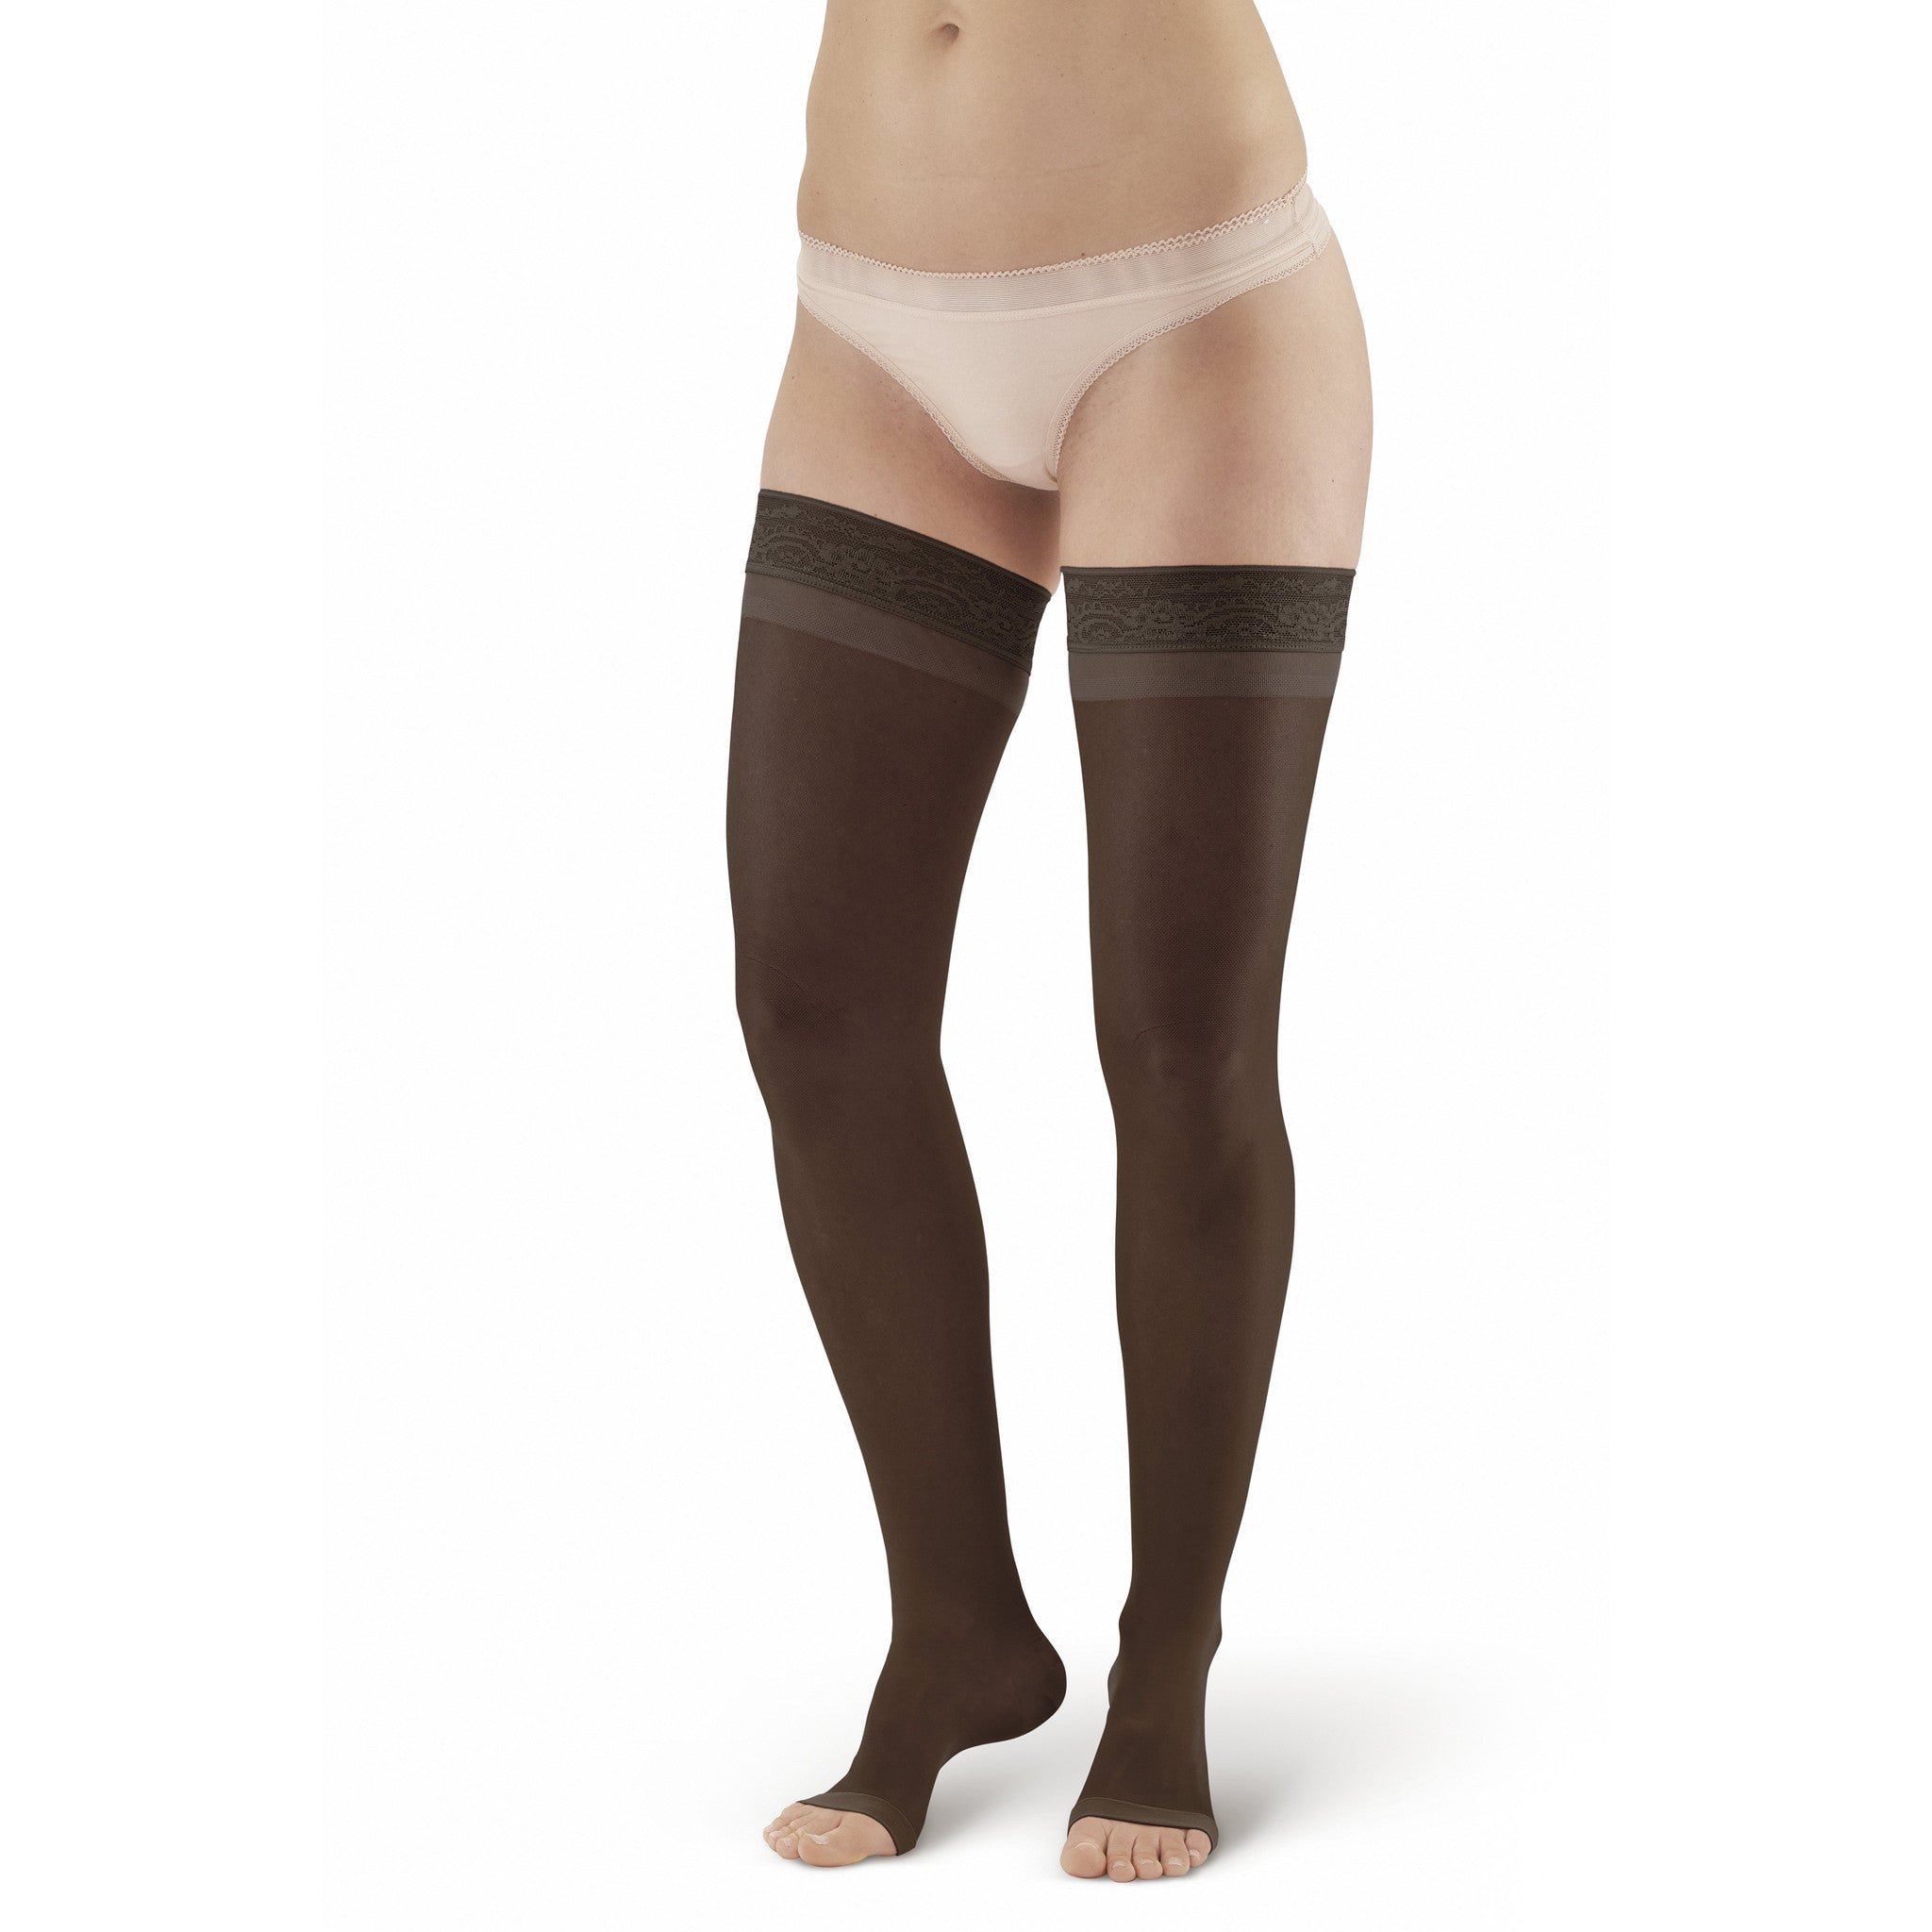 Thigh High Compression Stockings, Open Toe, Pair, Firm Support 20